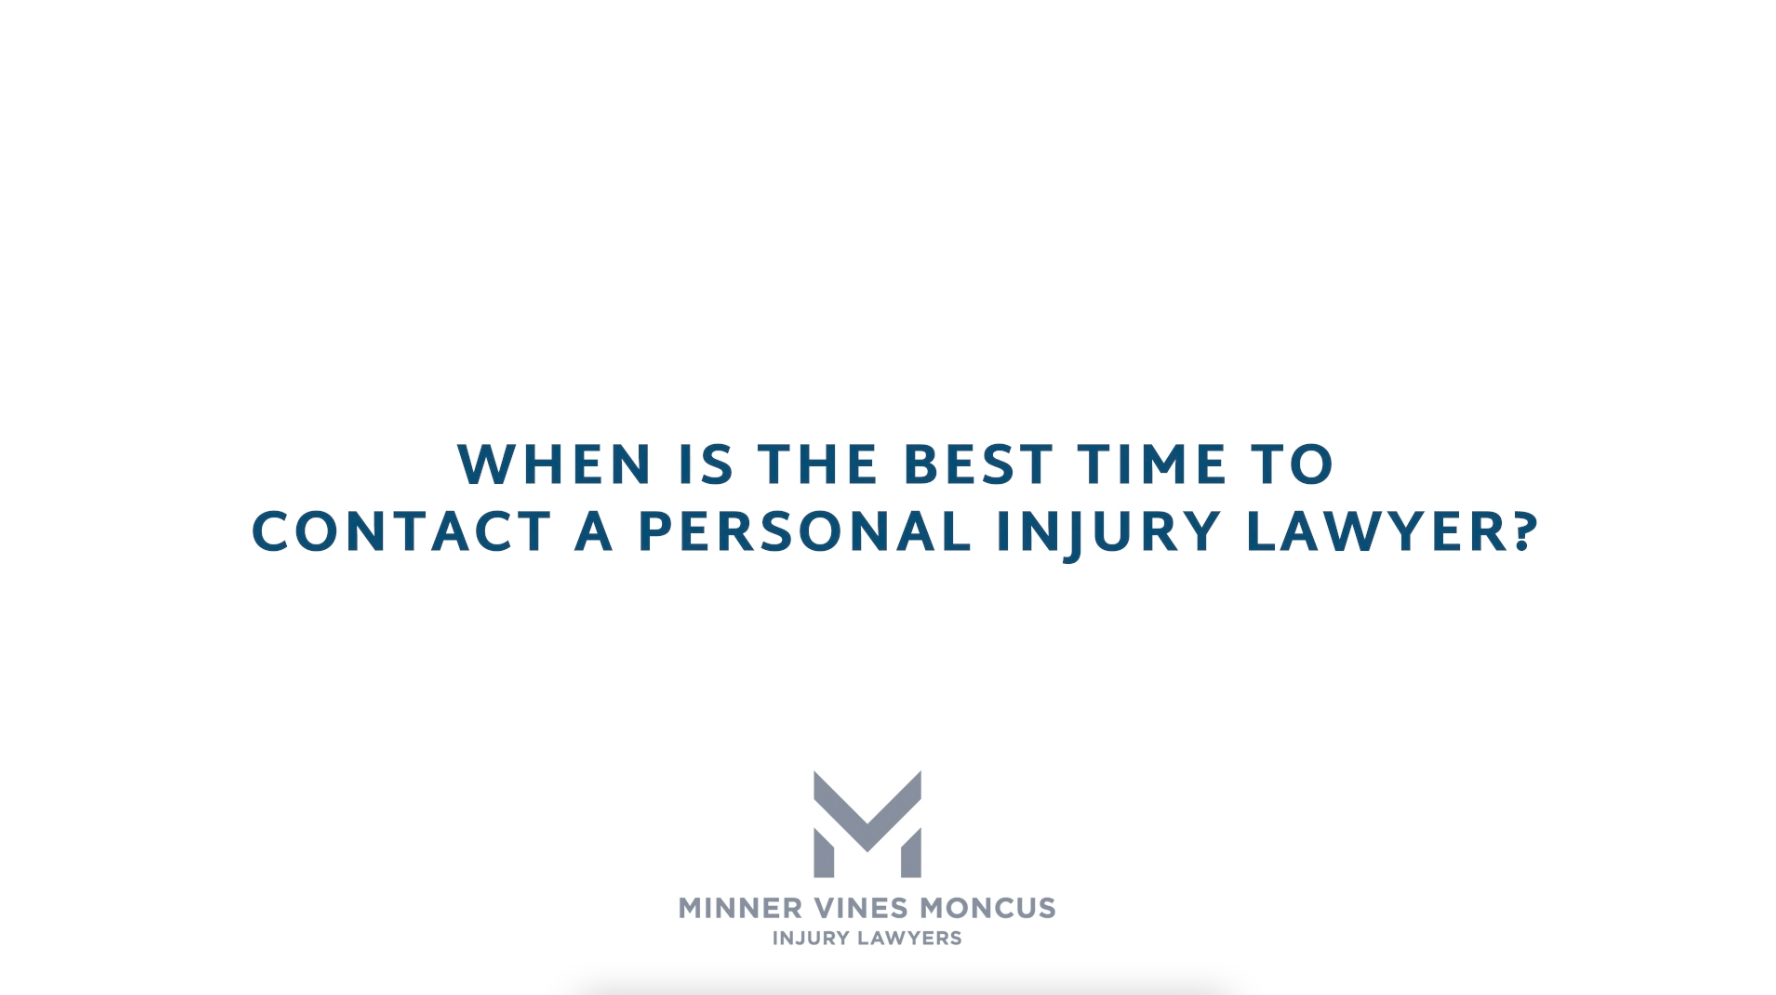 When should I contact a personal injury lawyer?